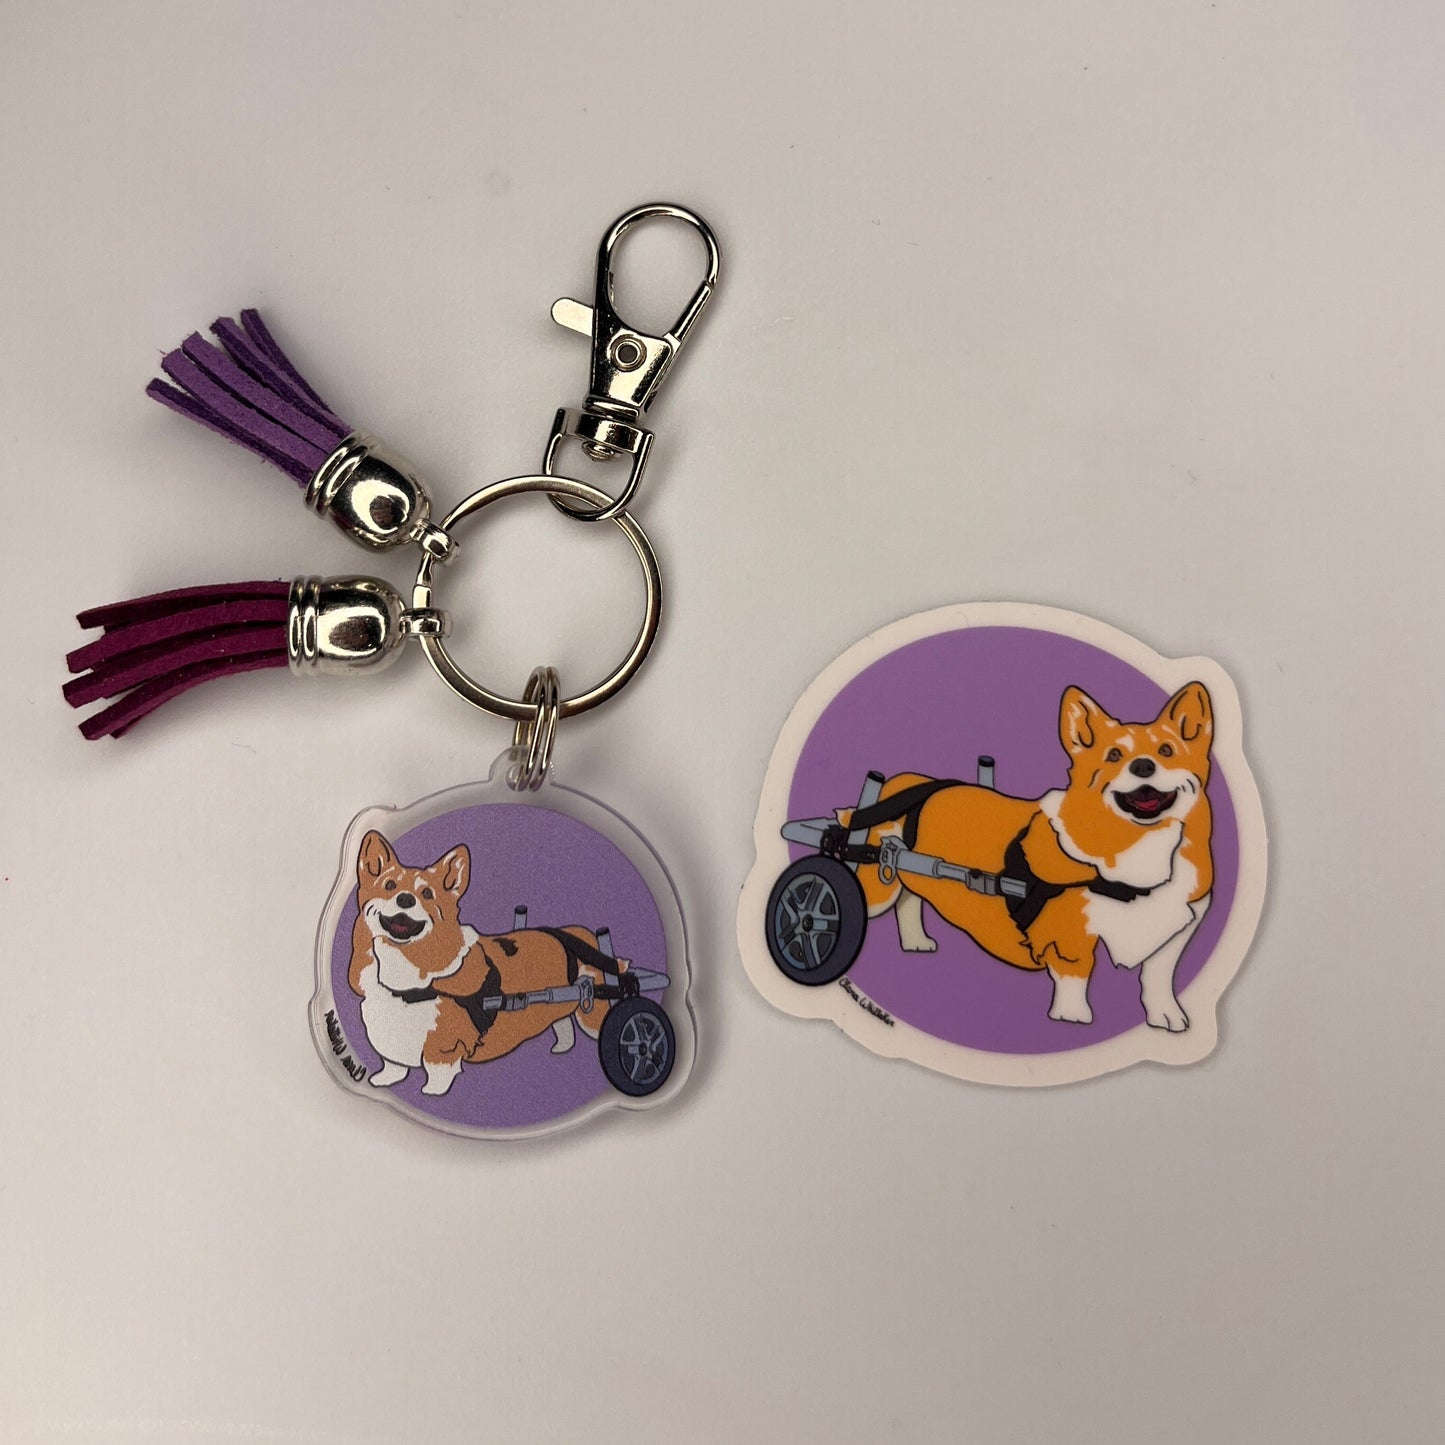 Corgi charm with two tassels metal lobster clasp and keyring next to a 2" x 2" vinyl Corgi sticker on a purple background 